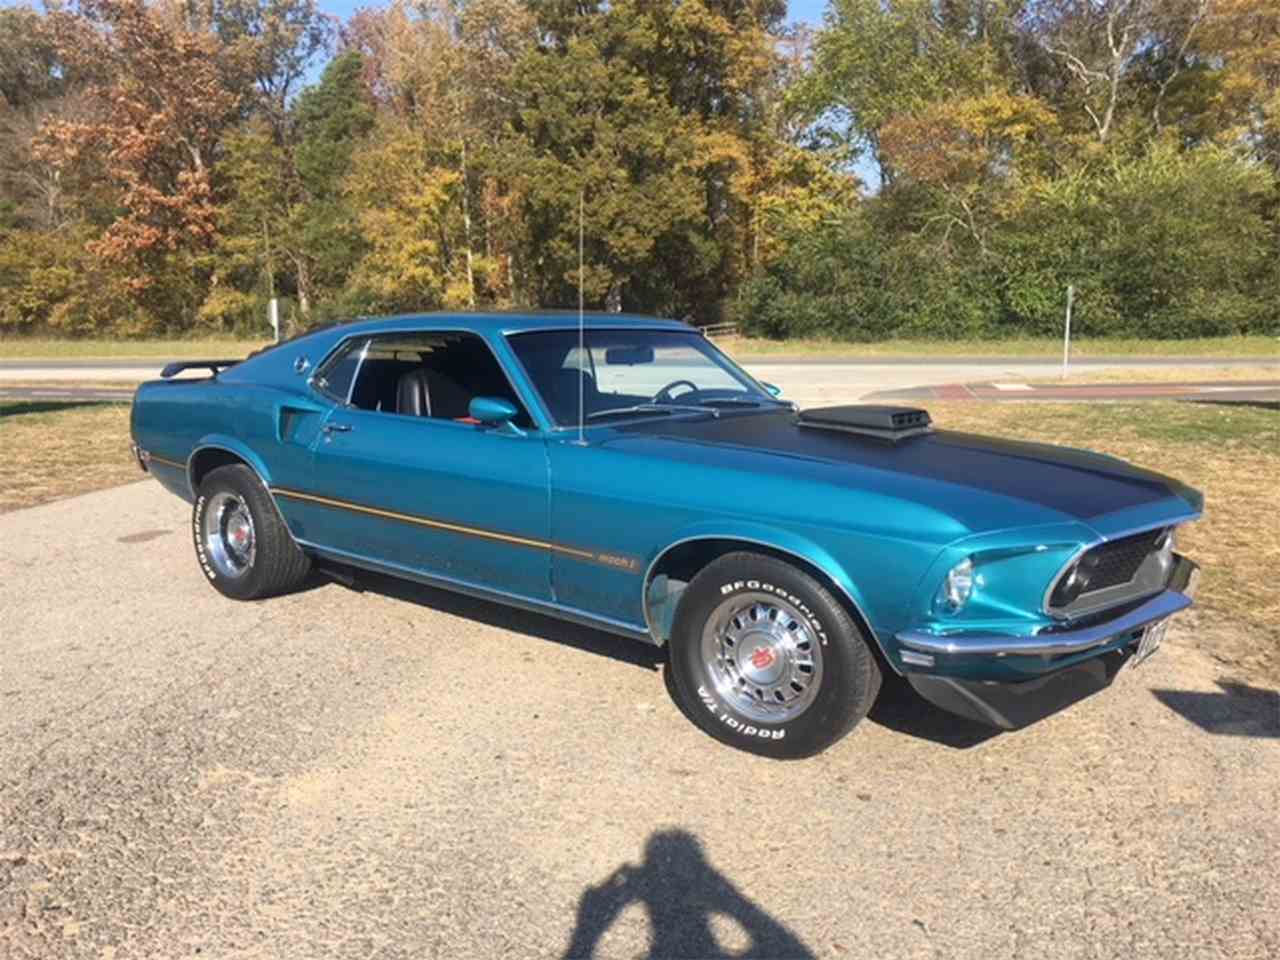 This '68 Mach 1 is priced at $47,000, but the seller was open to offers. | ClassicCars.com photo